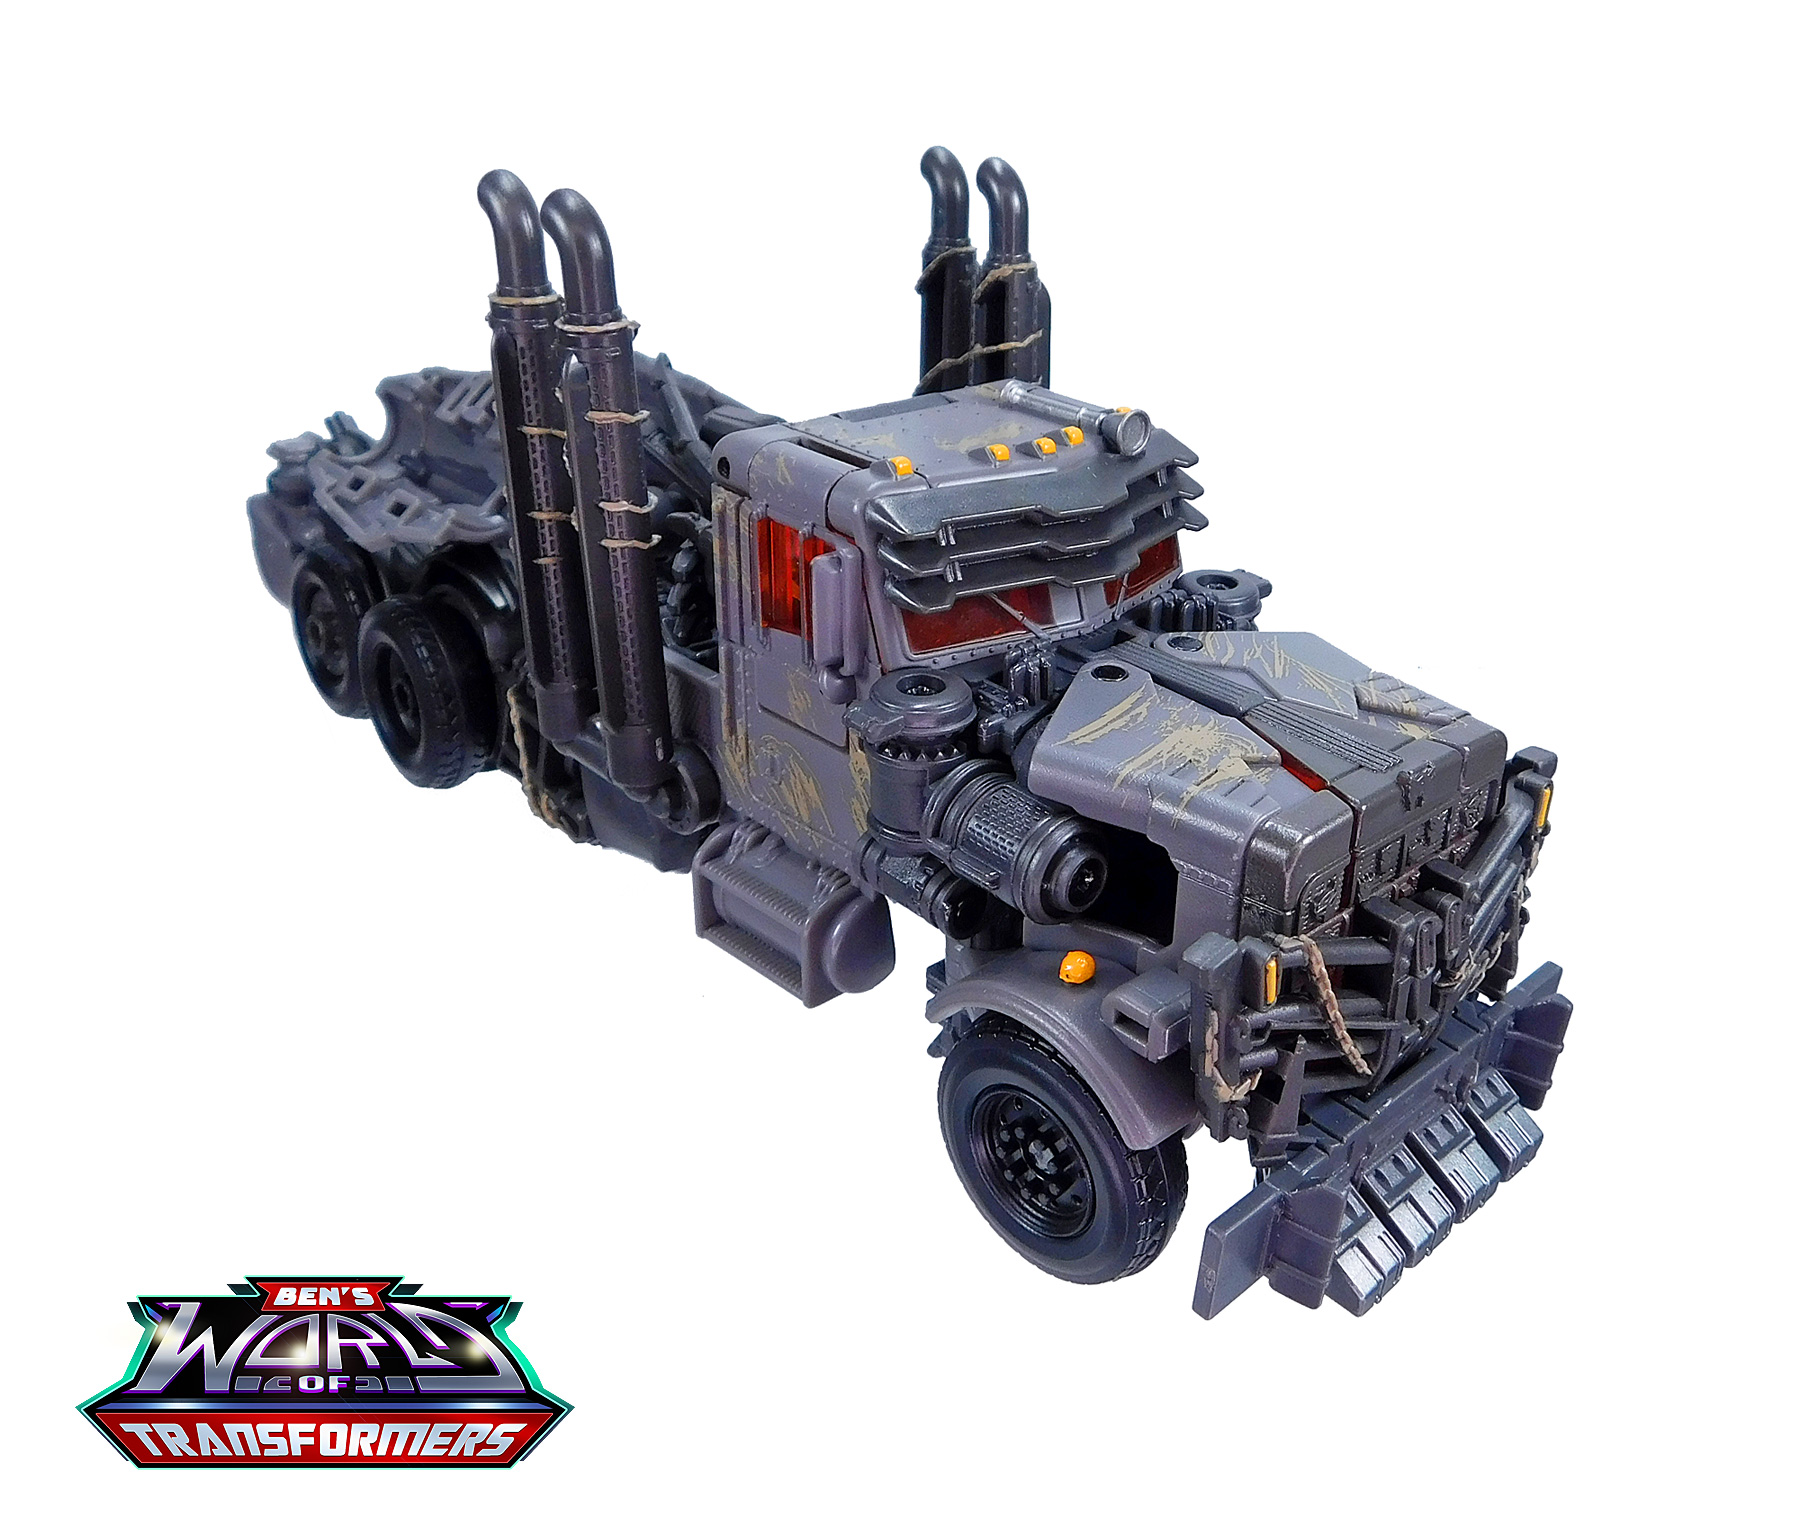 Toy Review: Studio Series Leader Class Scourge